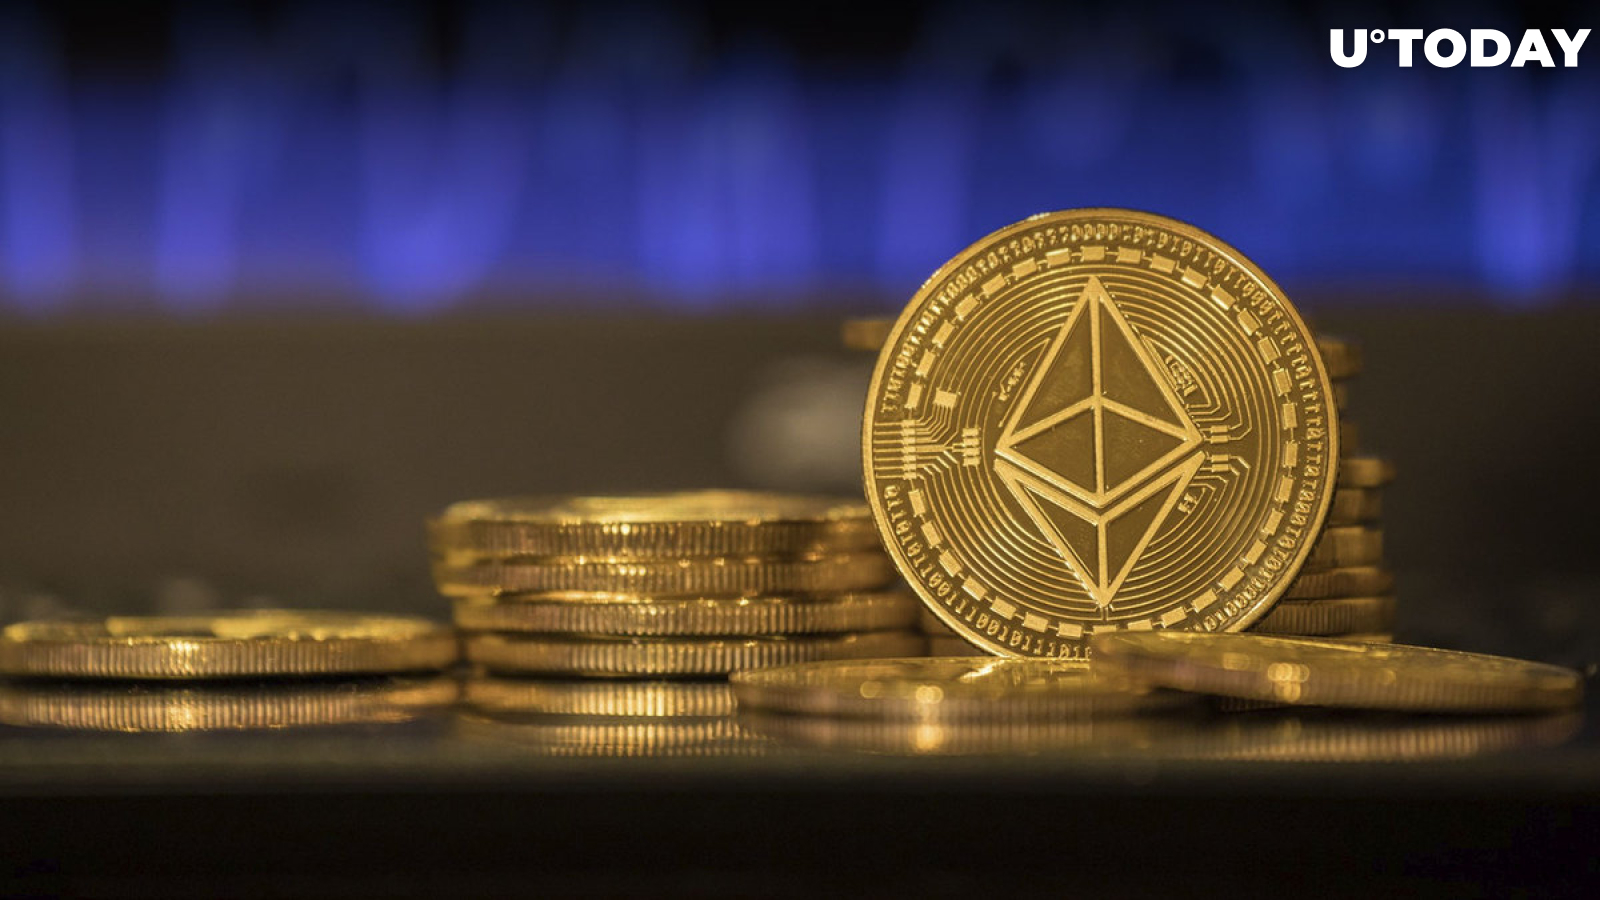 $4 Billion Worth of Ethereum (ETH) Purchased at This Price Level